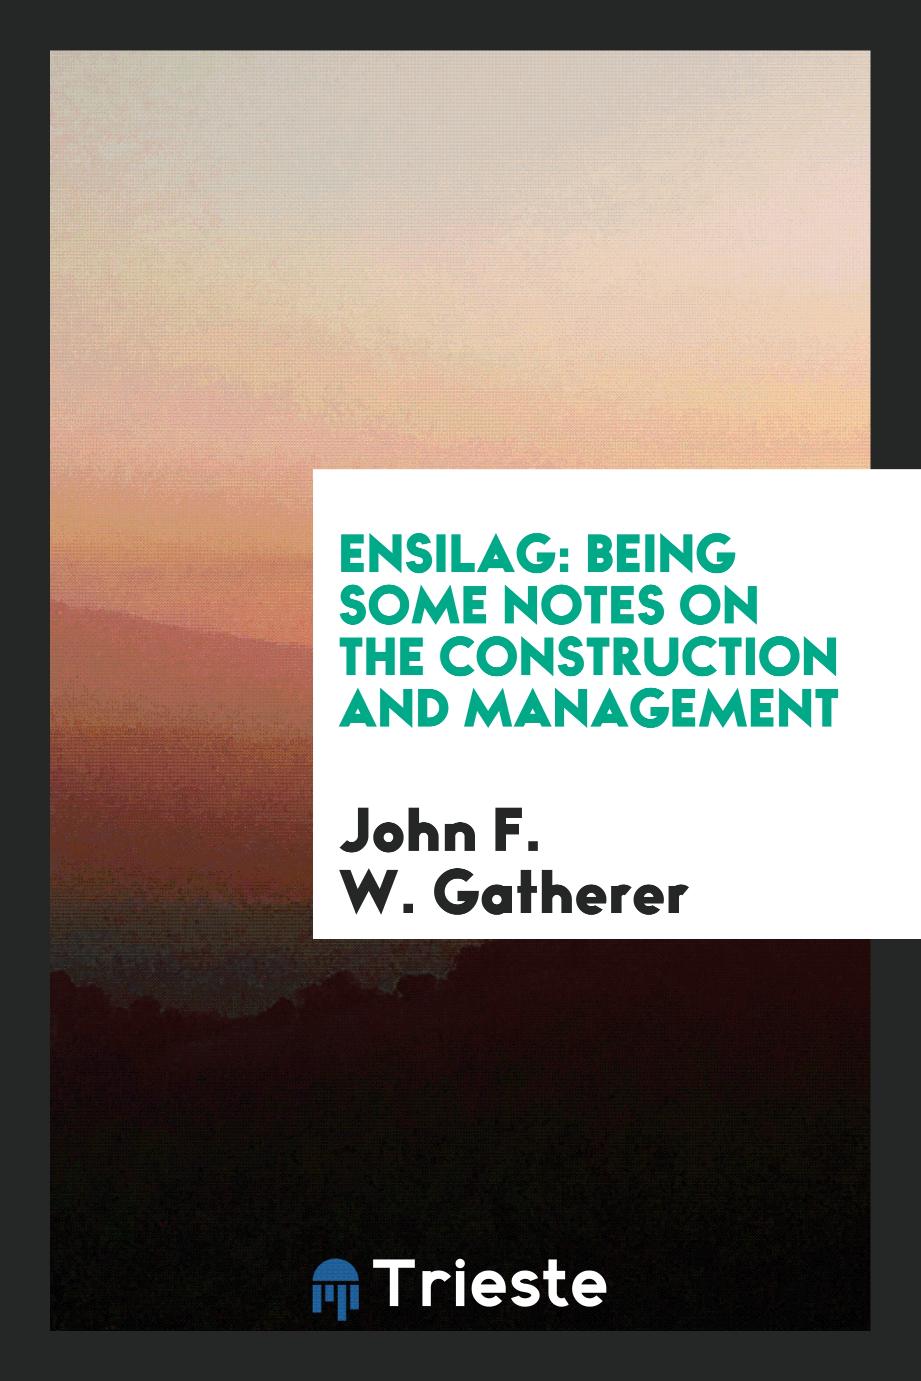 Ensilag: Being Some Notes on the Construction and Management